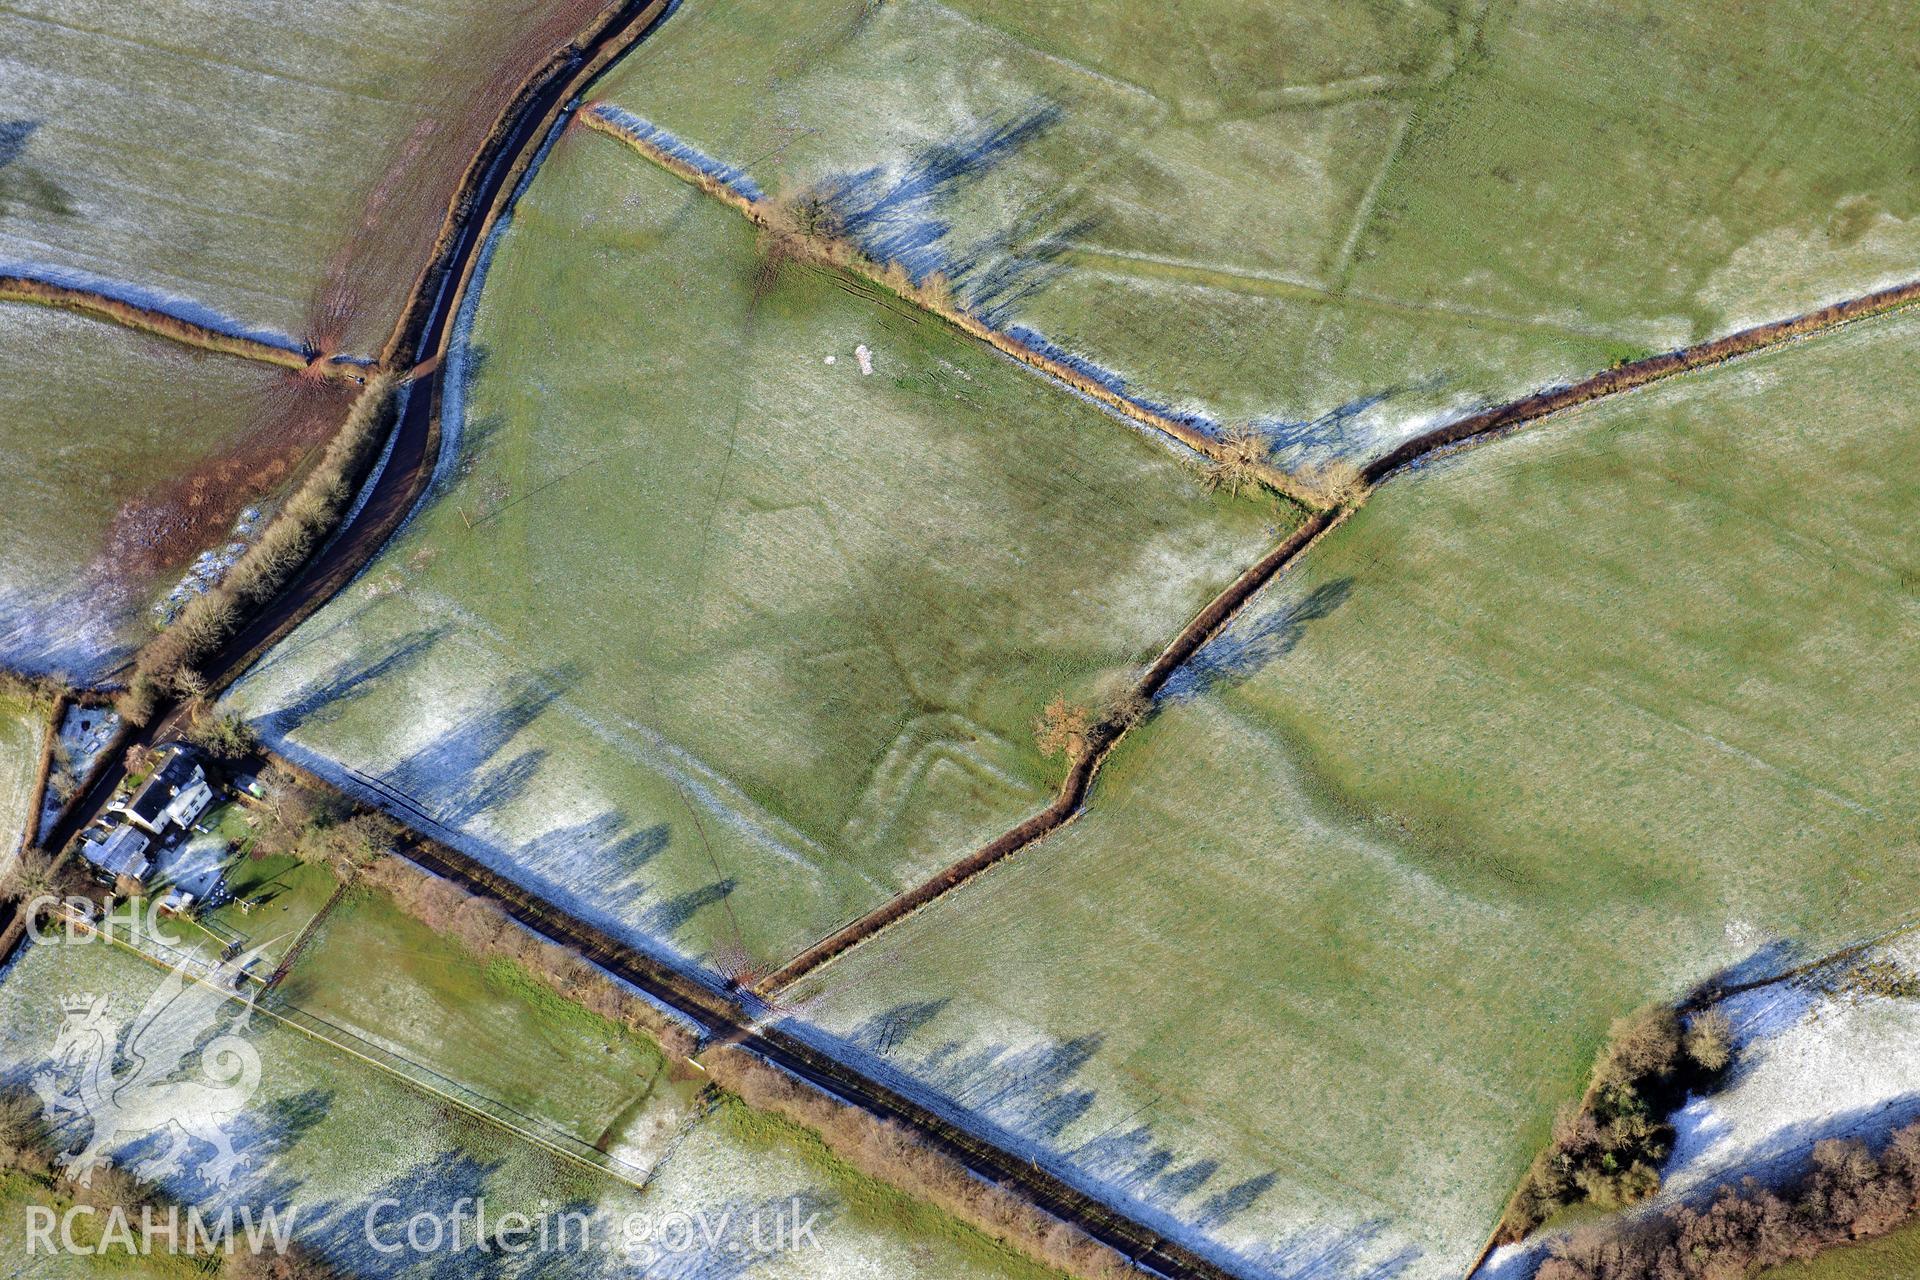 Treberfydd moated site, Llangors, south east of Brecon. Oblique aerial photograph taken during the Royal Commission?s programme of archaeological aerial reconnaissance by Toby Driver on 15th January 2013.